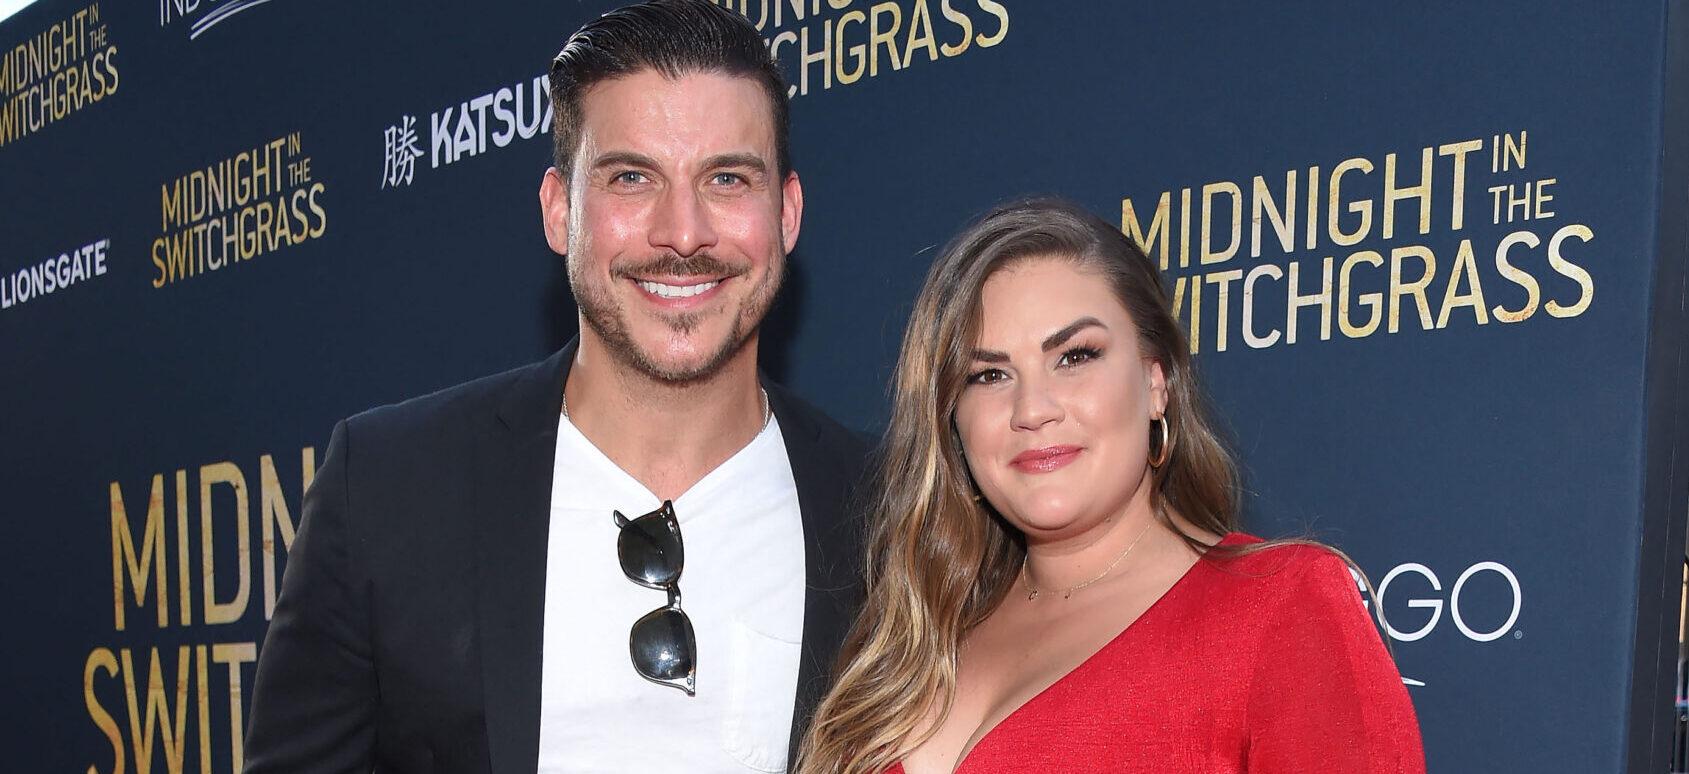 Jax Taylor focuses on family after split from Brittany Cartwright